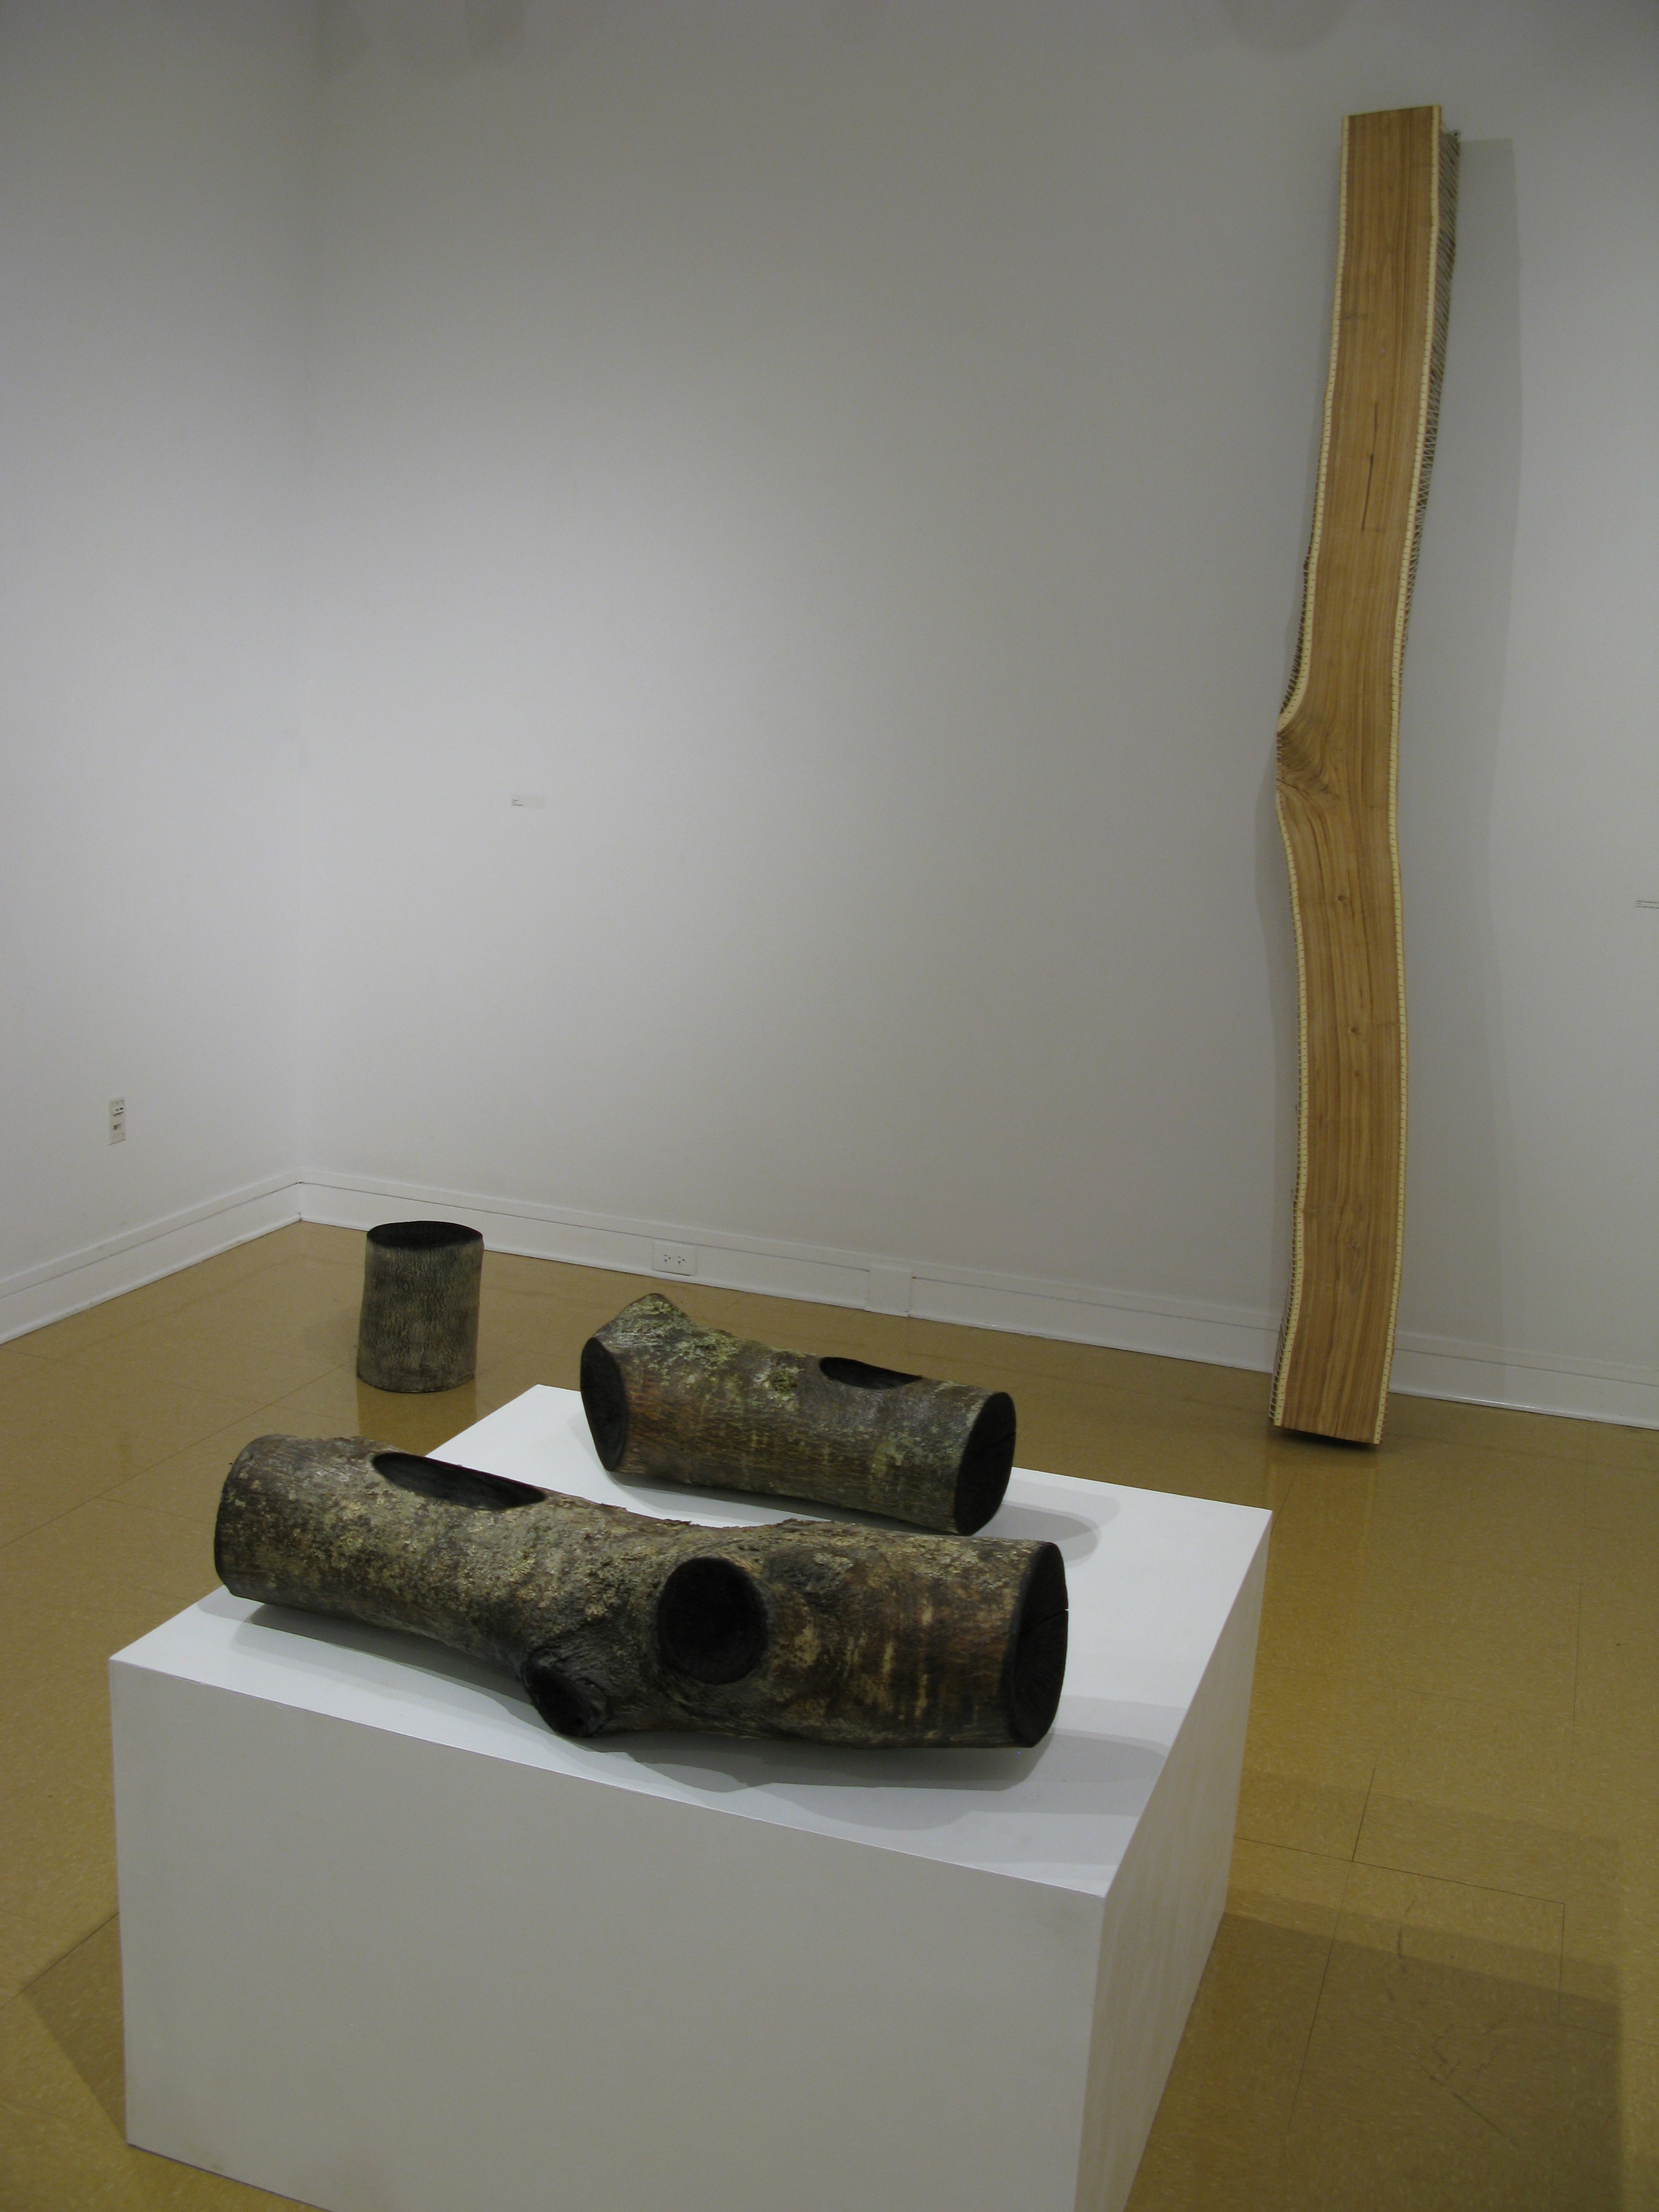  Installation view   Hollow No. 2 ,  Hollow No. 1 ,  Concave ,  Seam No. 3  (foreground to background) 